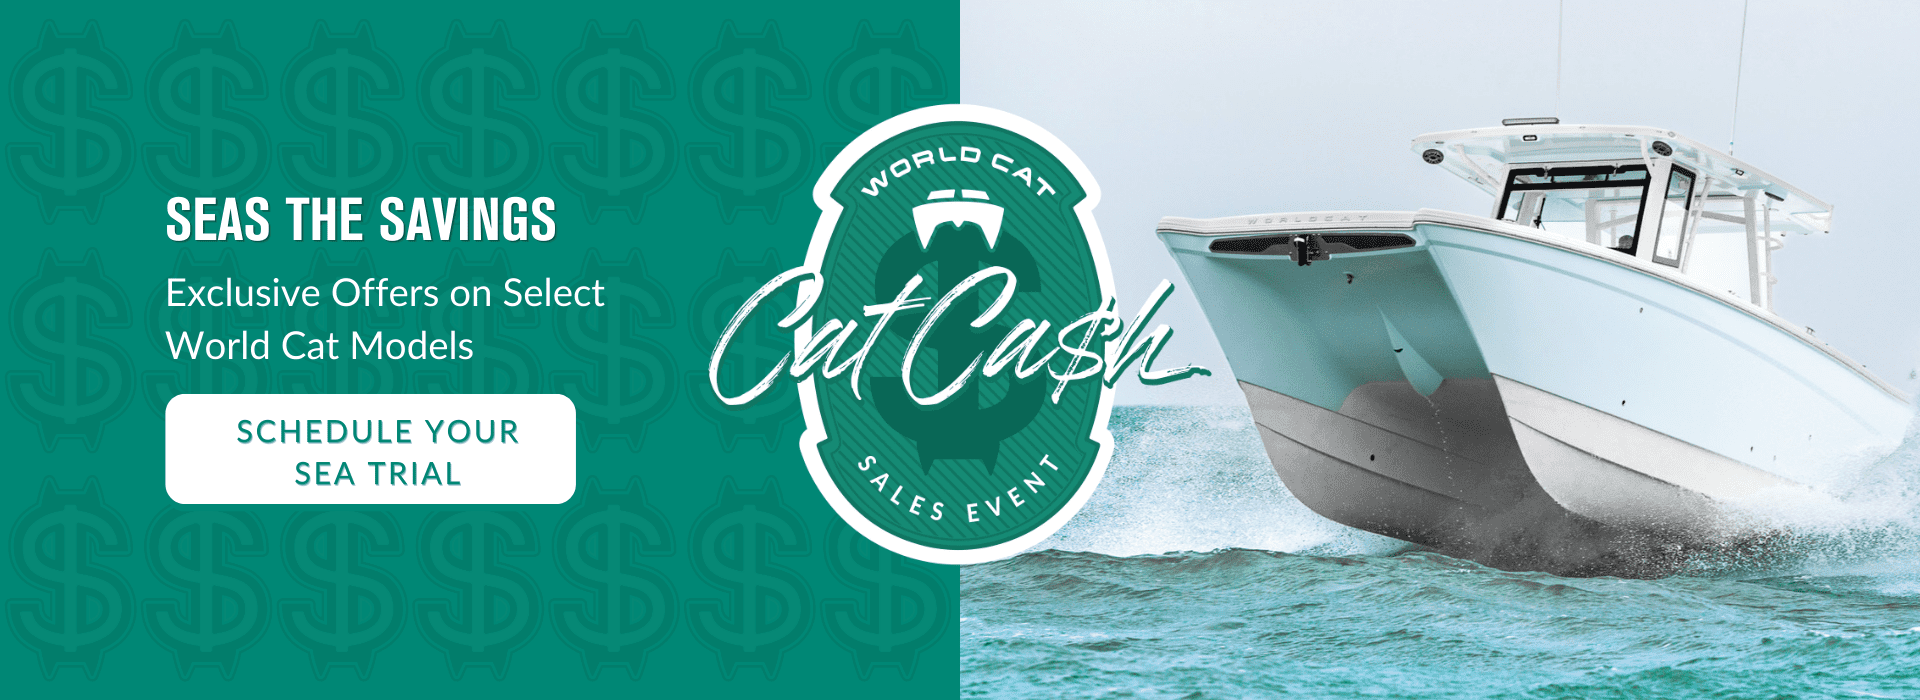 exclusive offers for a limited time only, schedule a world cat sea trial now